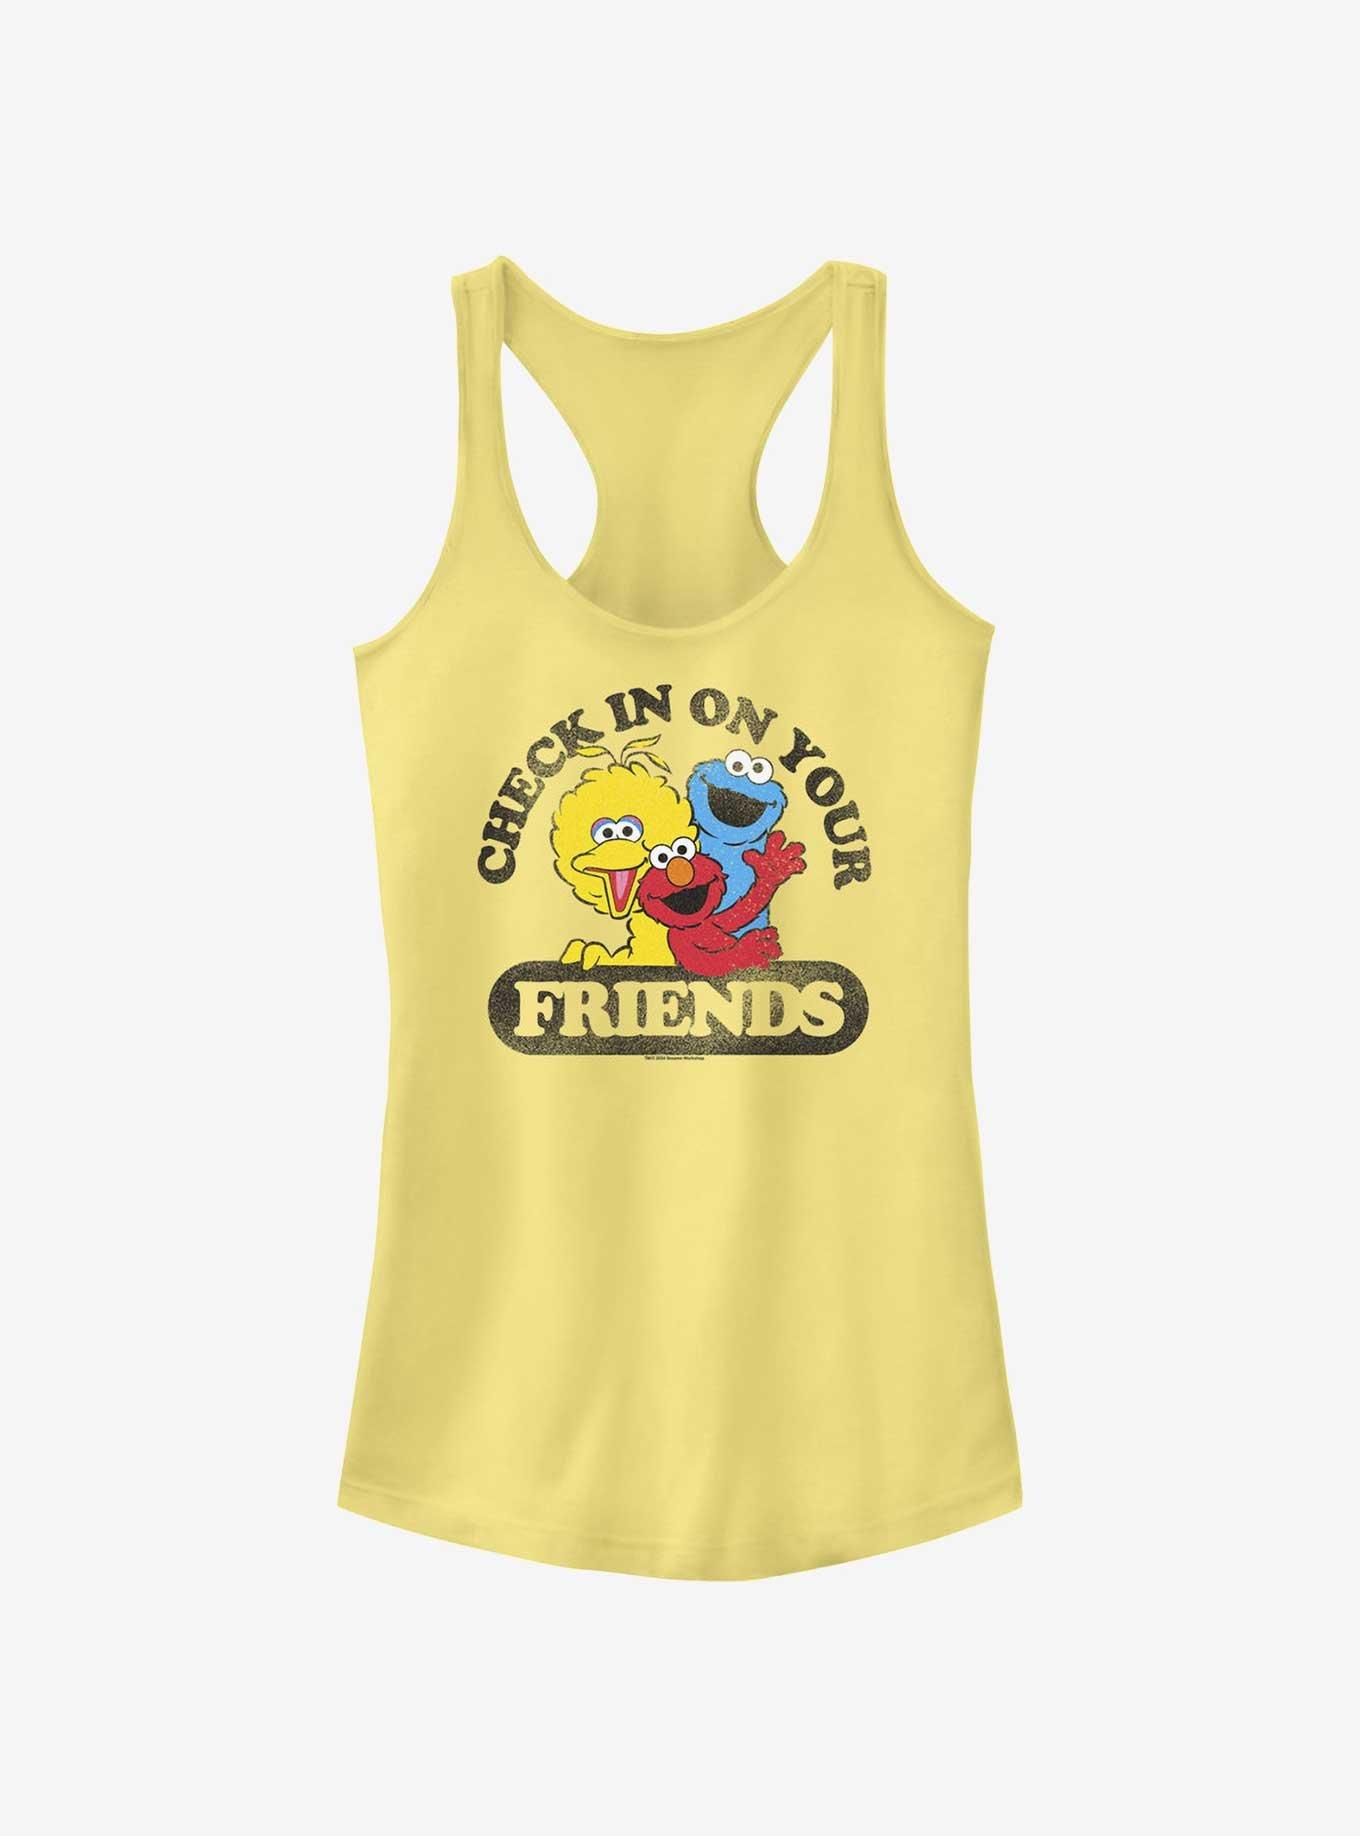 Sesame Street Check In On Your Friends Big Bird Cookie Monster and Elmo Girls Tank, BANANA, hi-res